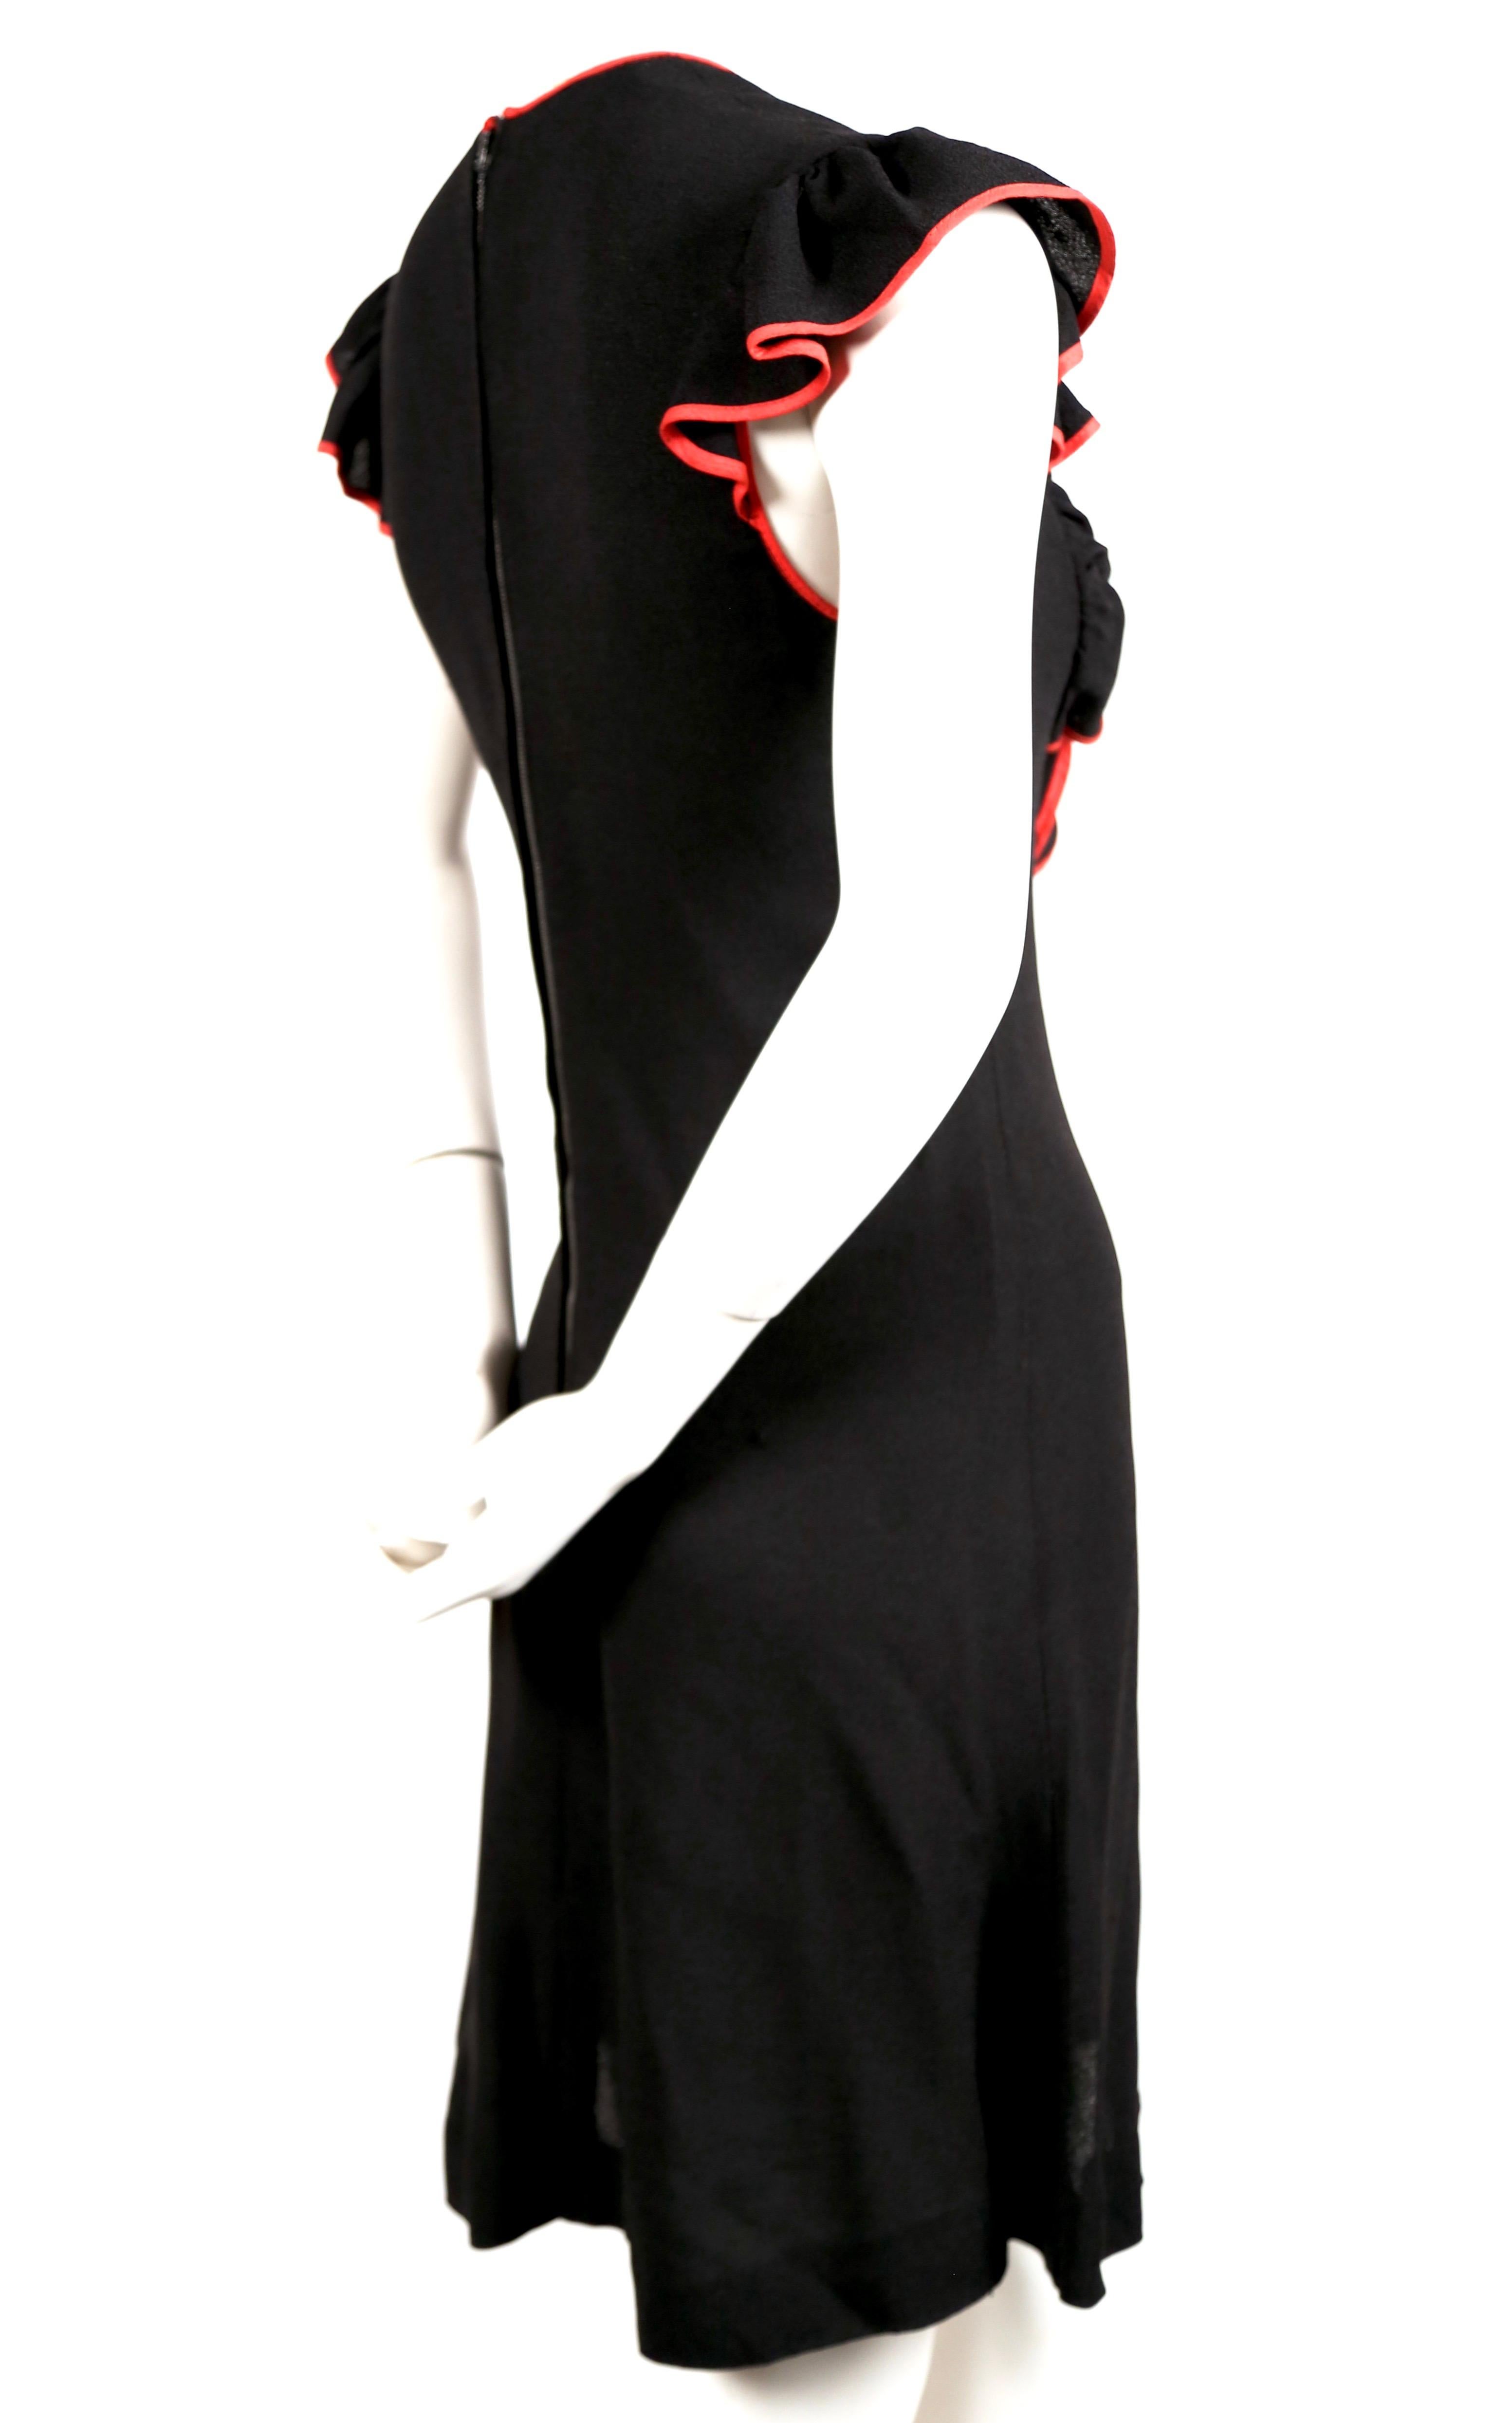 Jet-black, moss crepe dress with cut out and red trim designed by Ossie Clark for Radley. Best fits a US 4-6. Approximate measurements: shoulder 14